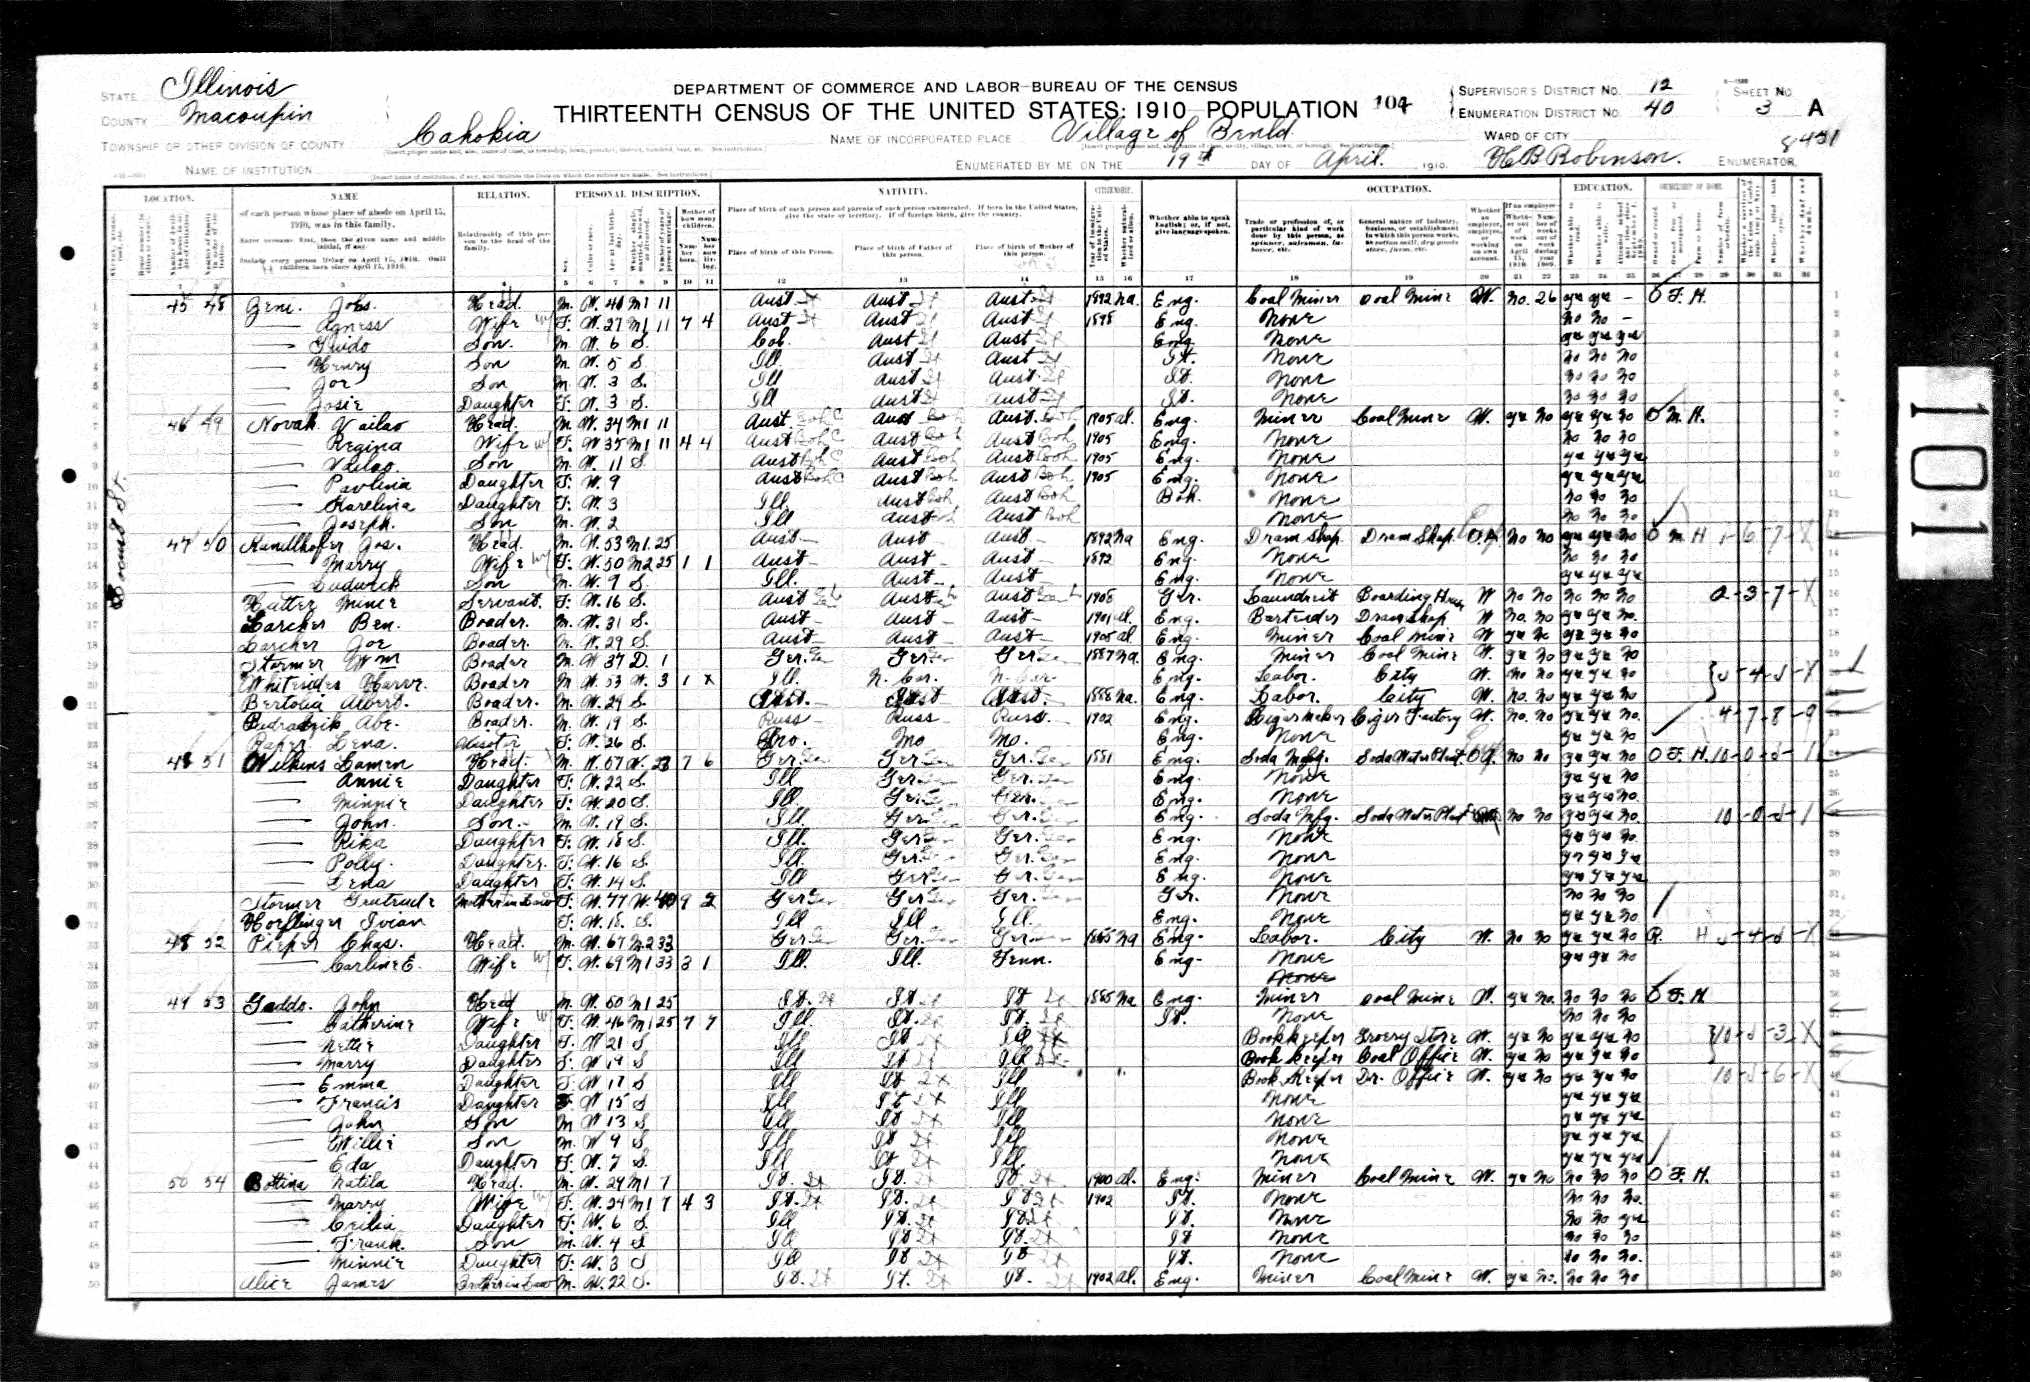 Charles W. and Caroline (Walker) Pieper, 1910 Macoupin County, Illinois, census